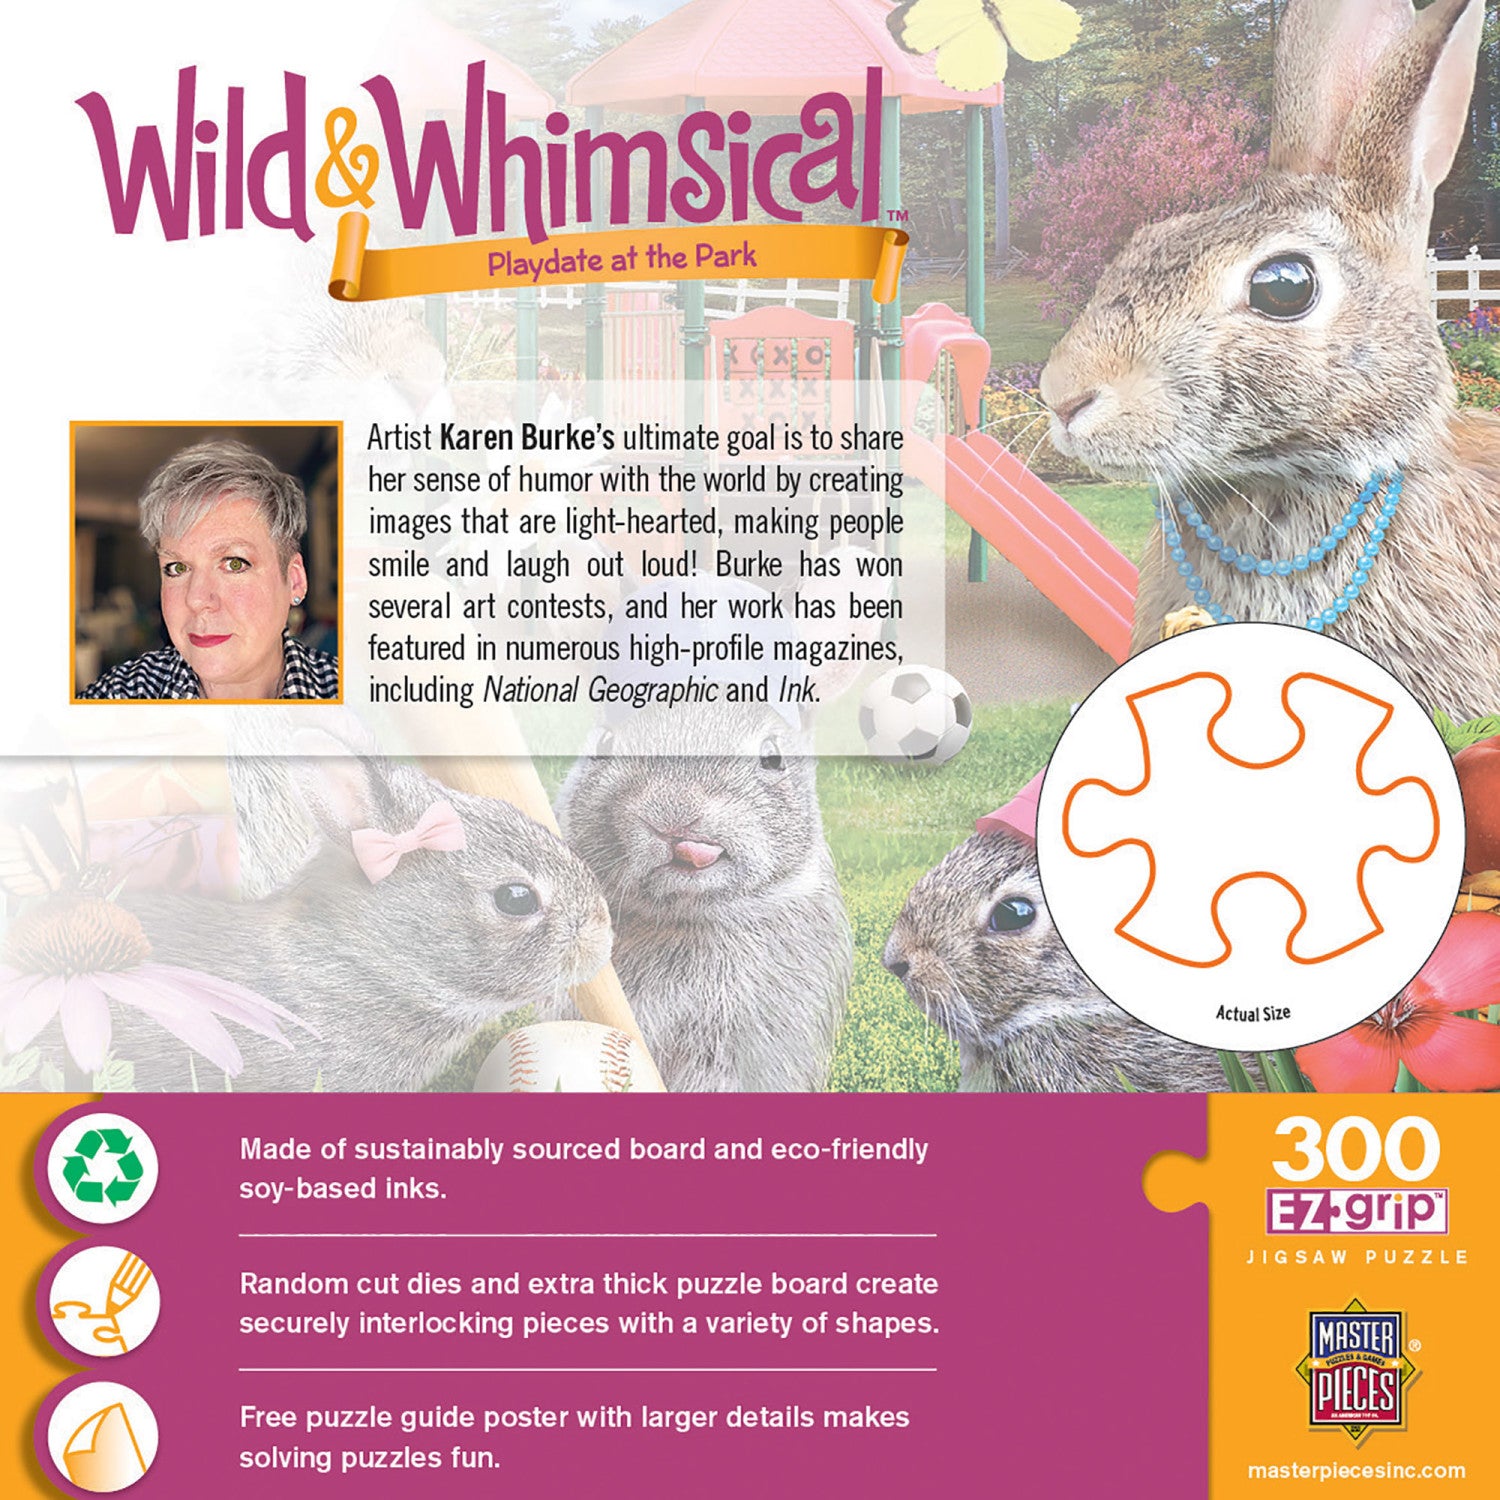 Wild & Whimsical - Playdate at the Park 300 Piece EZ Grip Jigsaw Puzzle